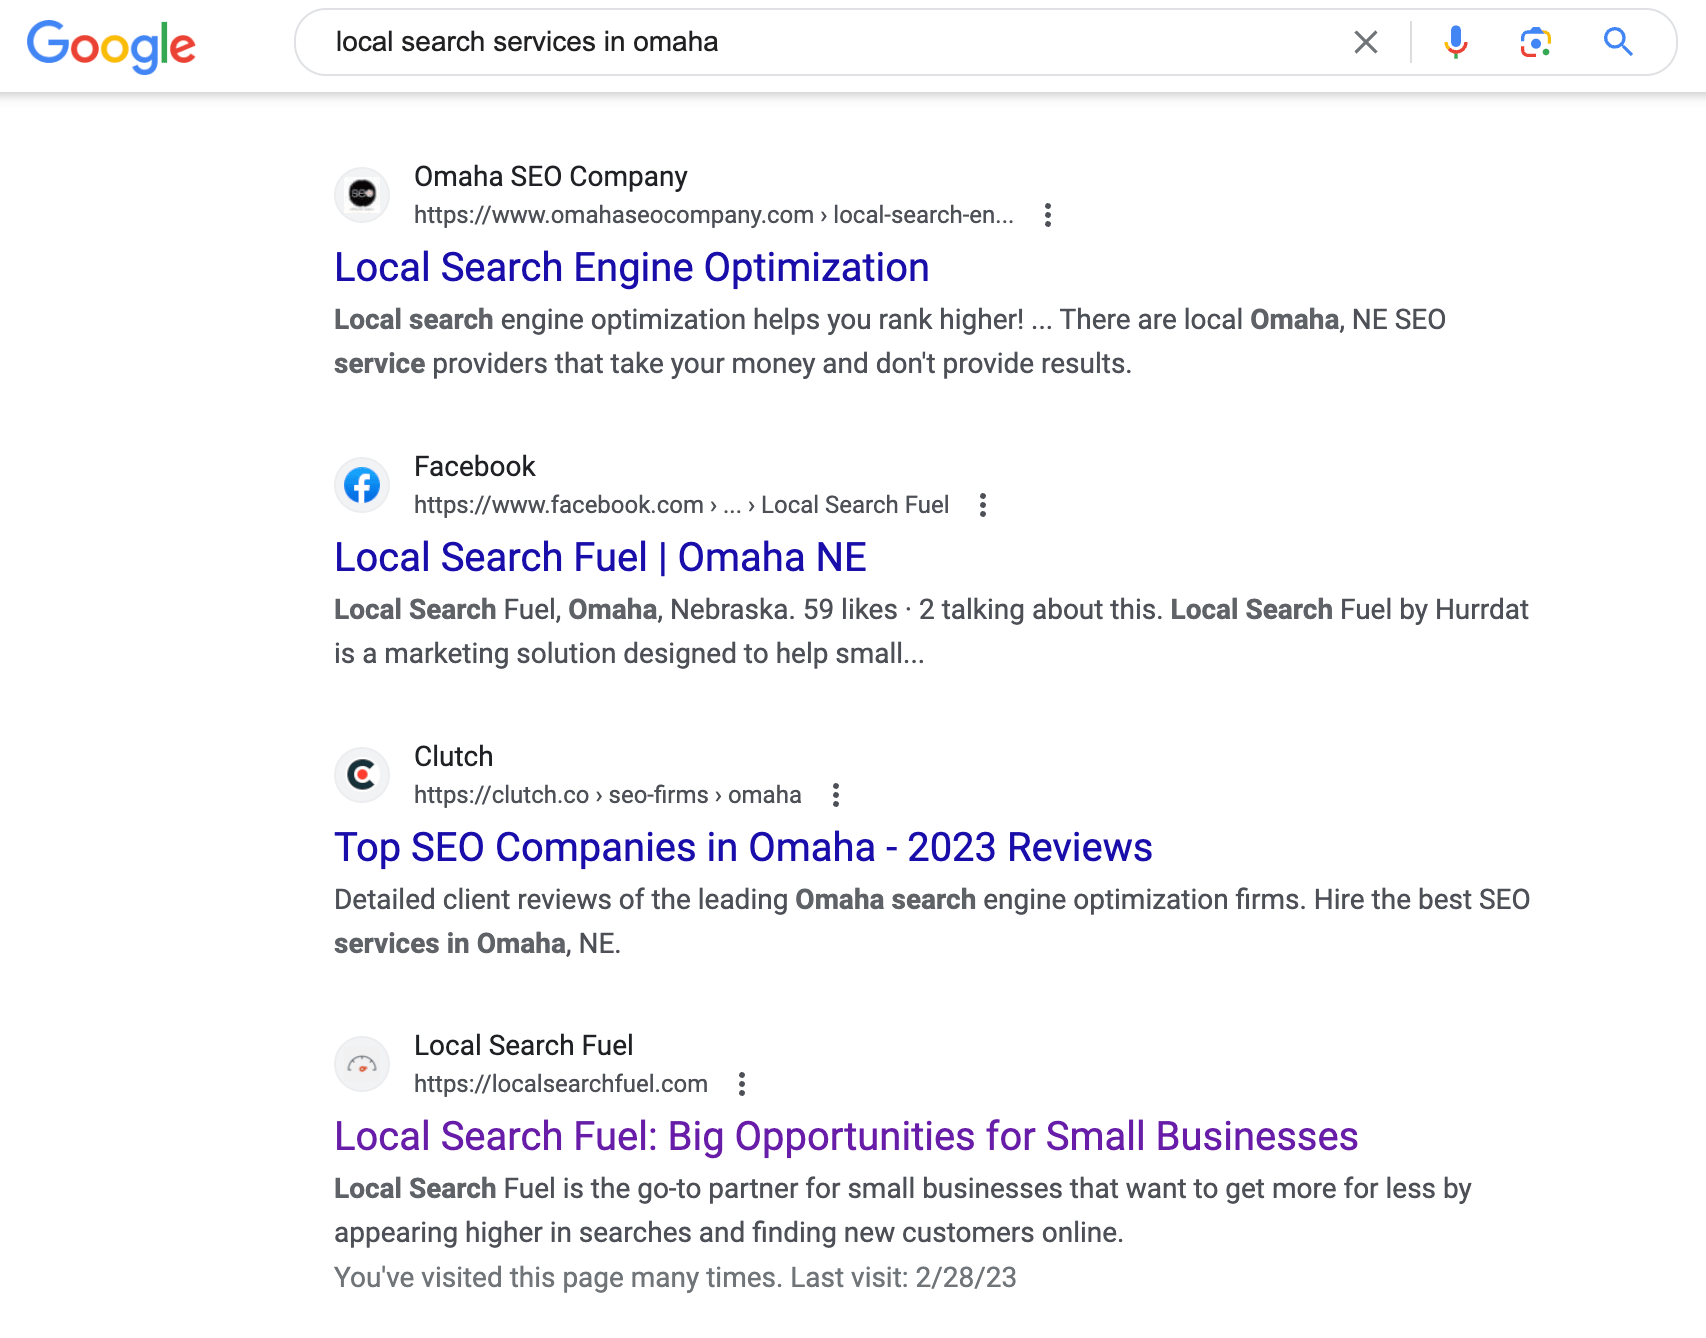 Screenshot of organic search results on Google for search term "local search services in omaha"